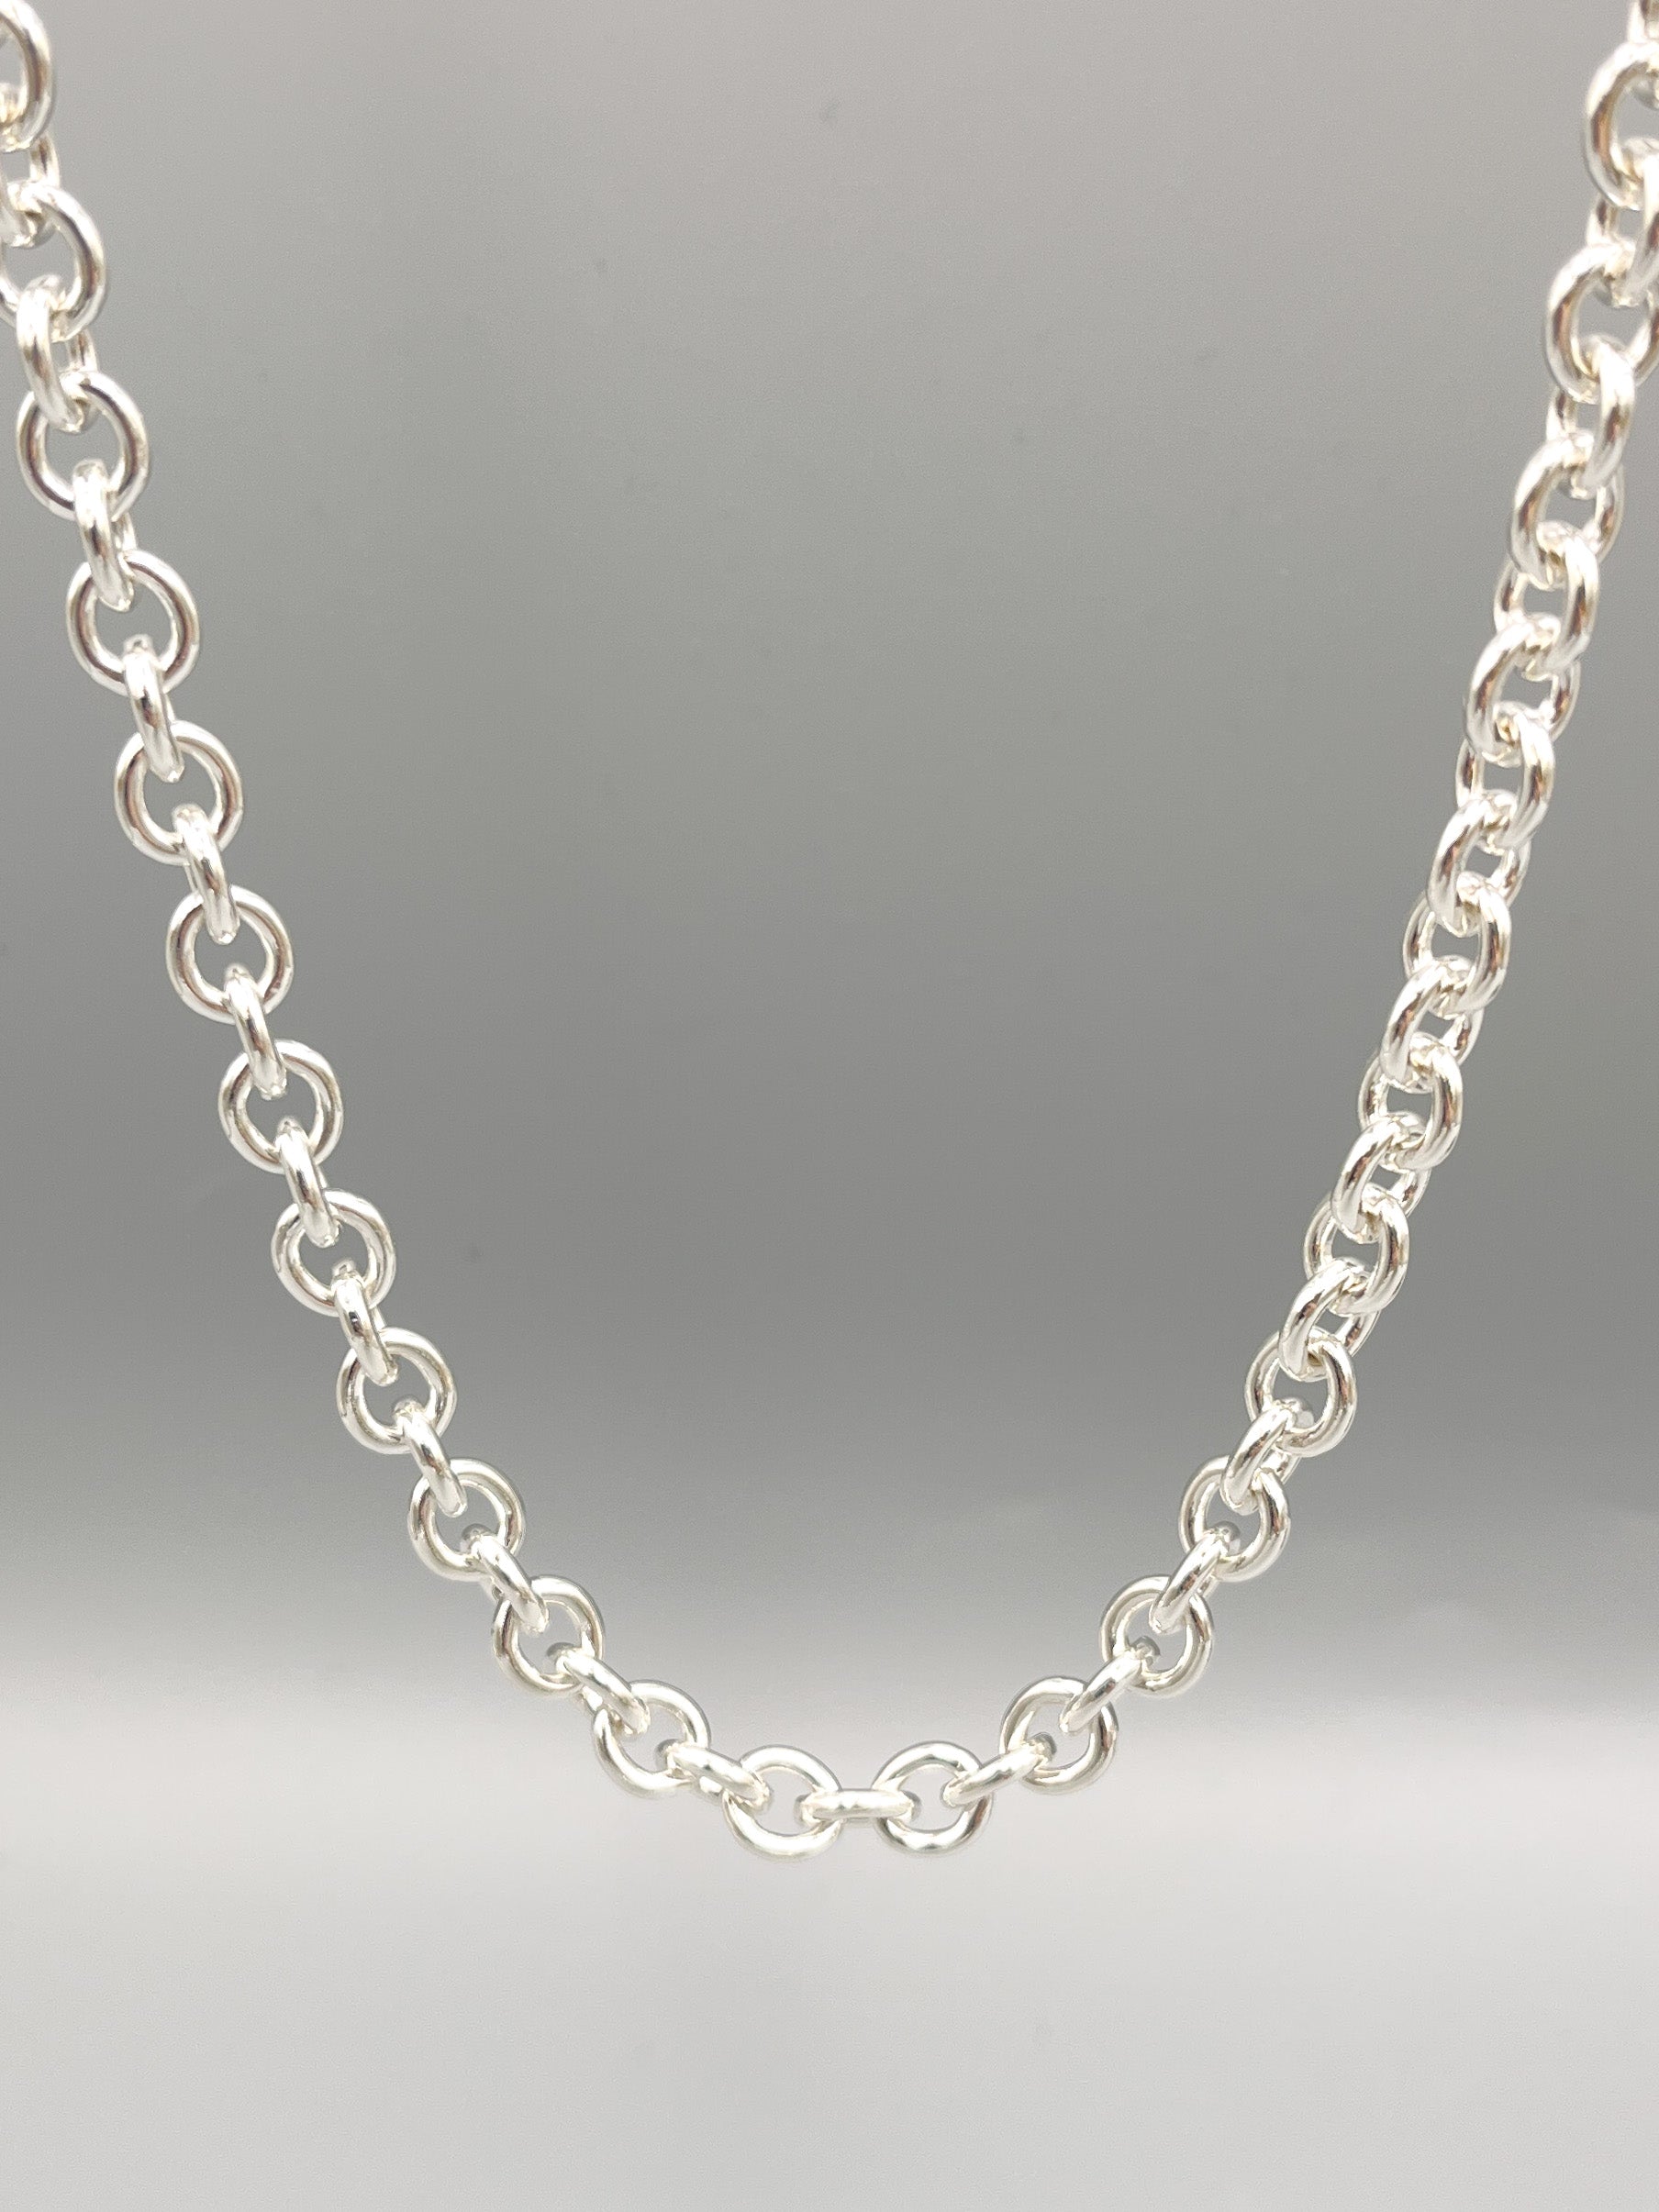 Sterling Silver Necklace. 38” Italian heavy cable link with large carabiner clasp